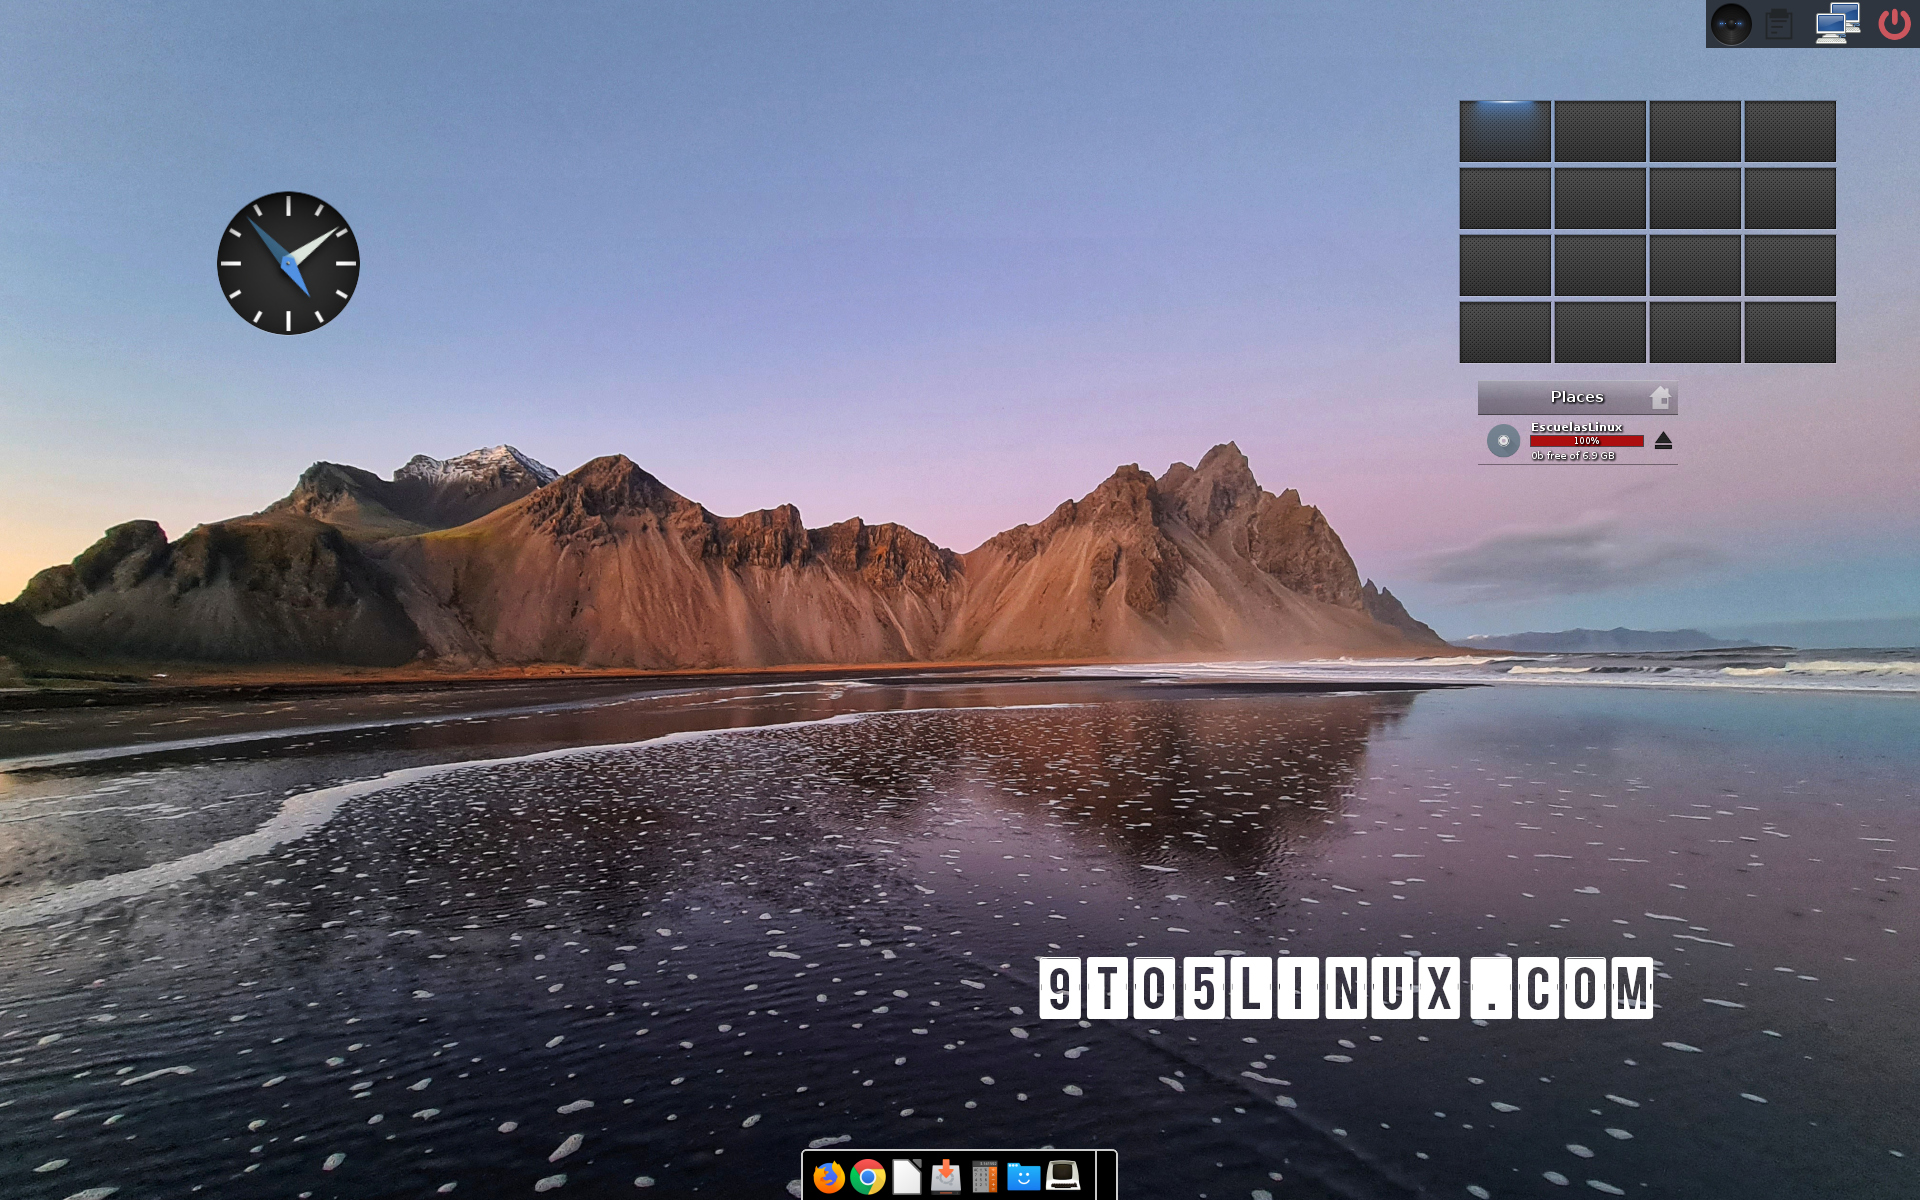 Educational Distro Escuelas Linux 7.0 Released with New Apps, Based on Bodhi Linux 6.0